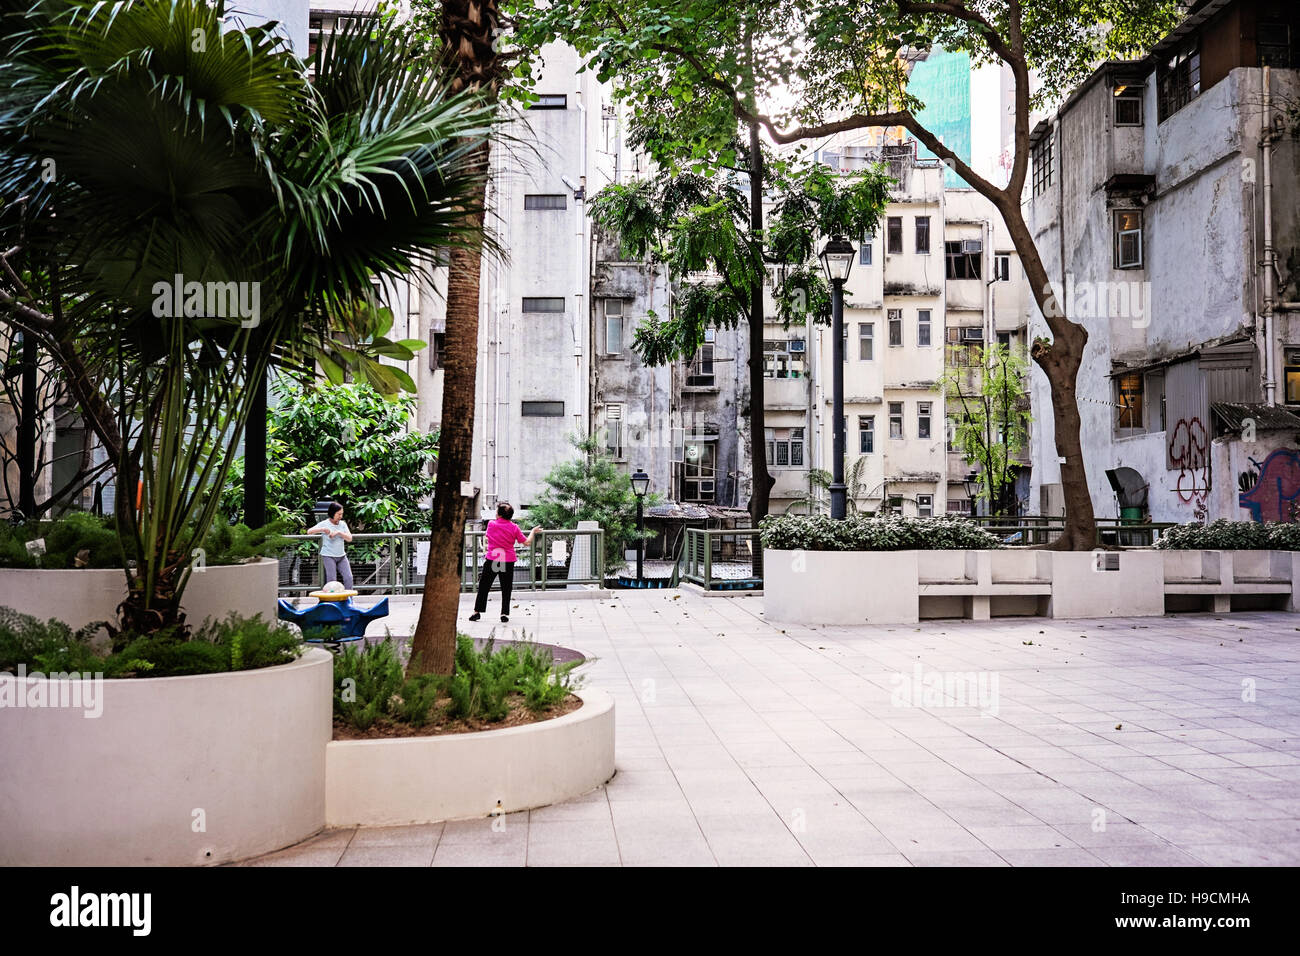 Two women practicing Tai Chi in a court yard in Central, Hong Kong Stock Photo